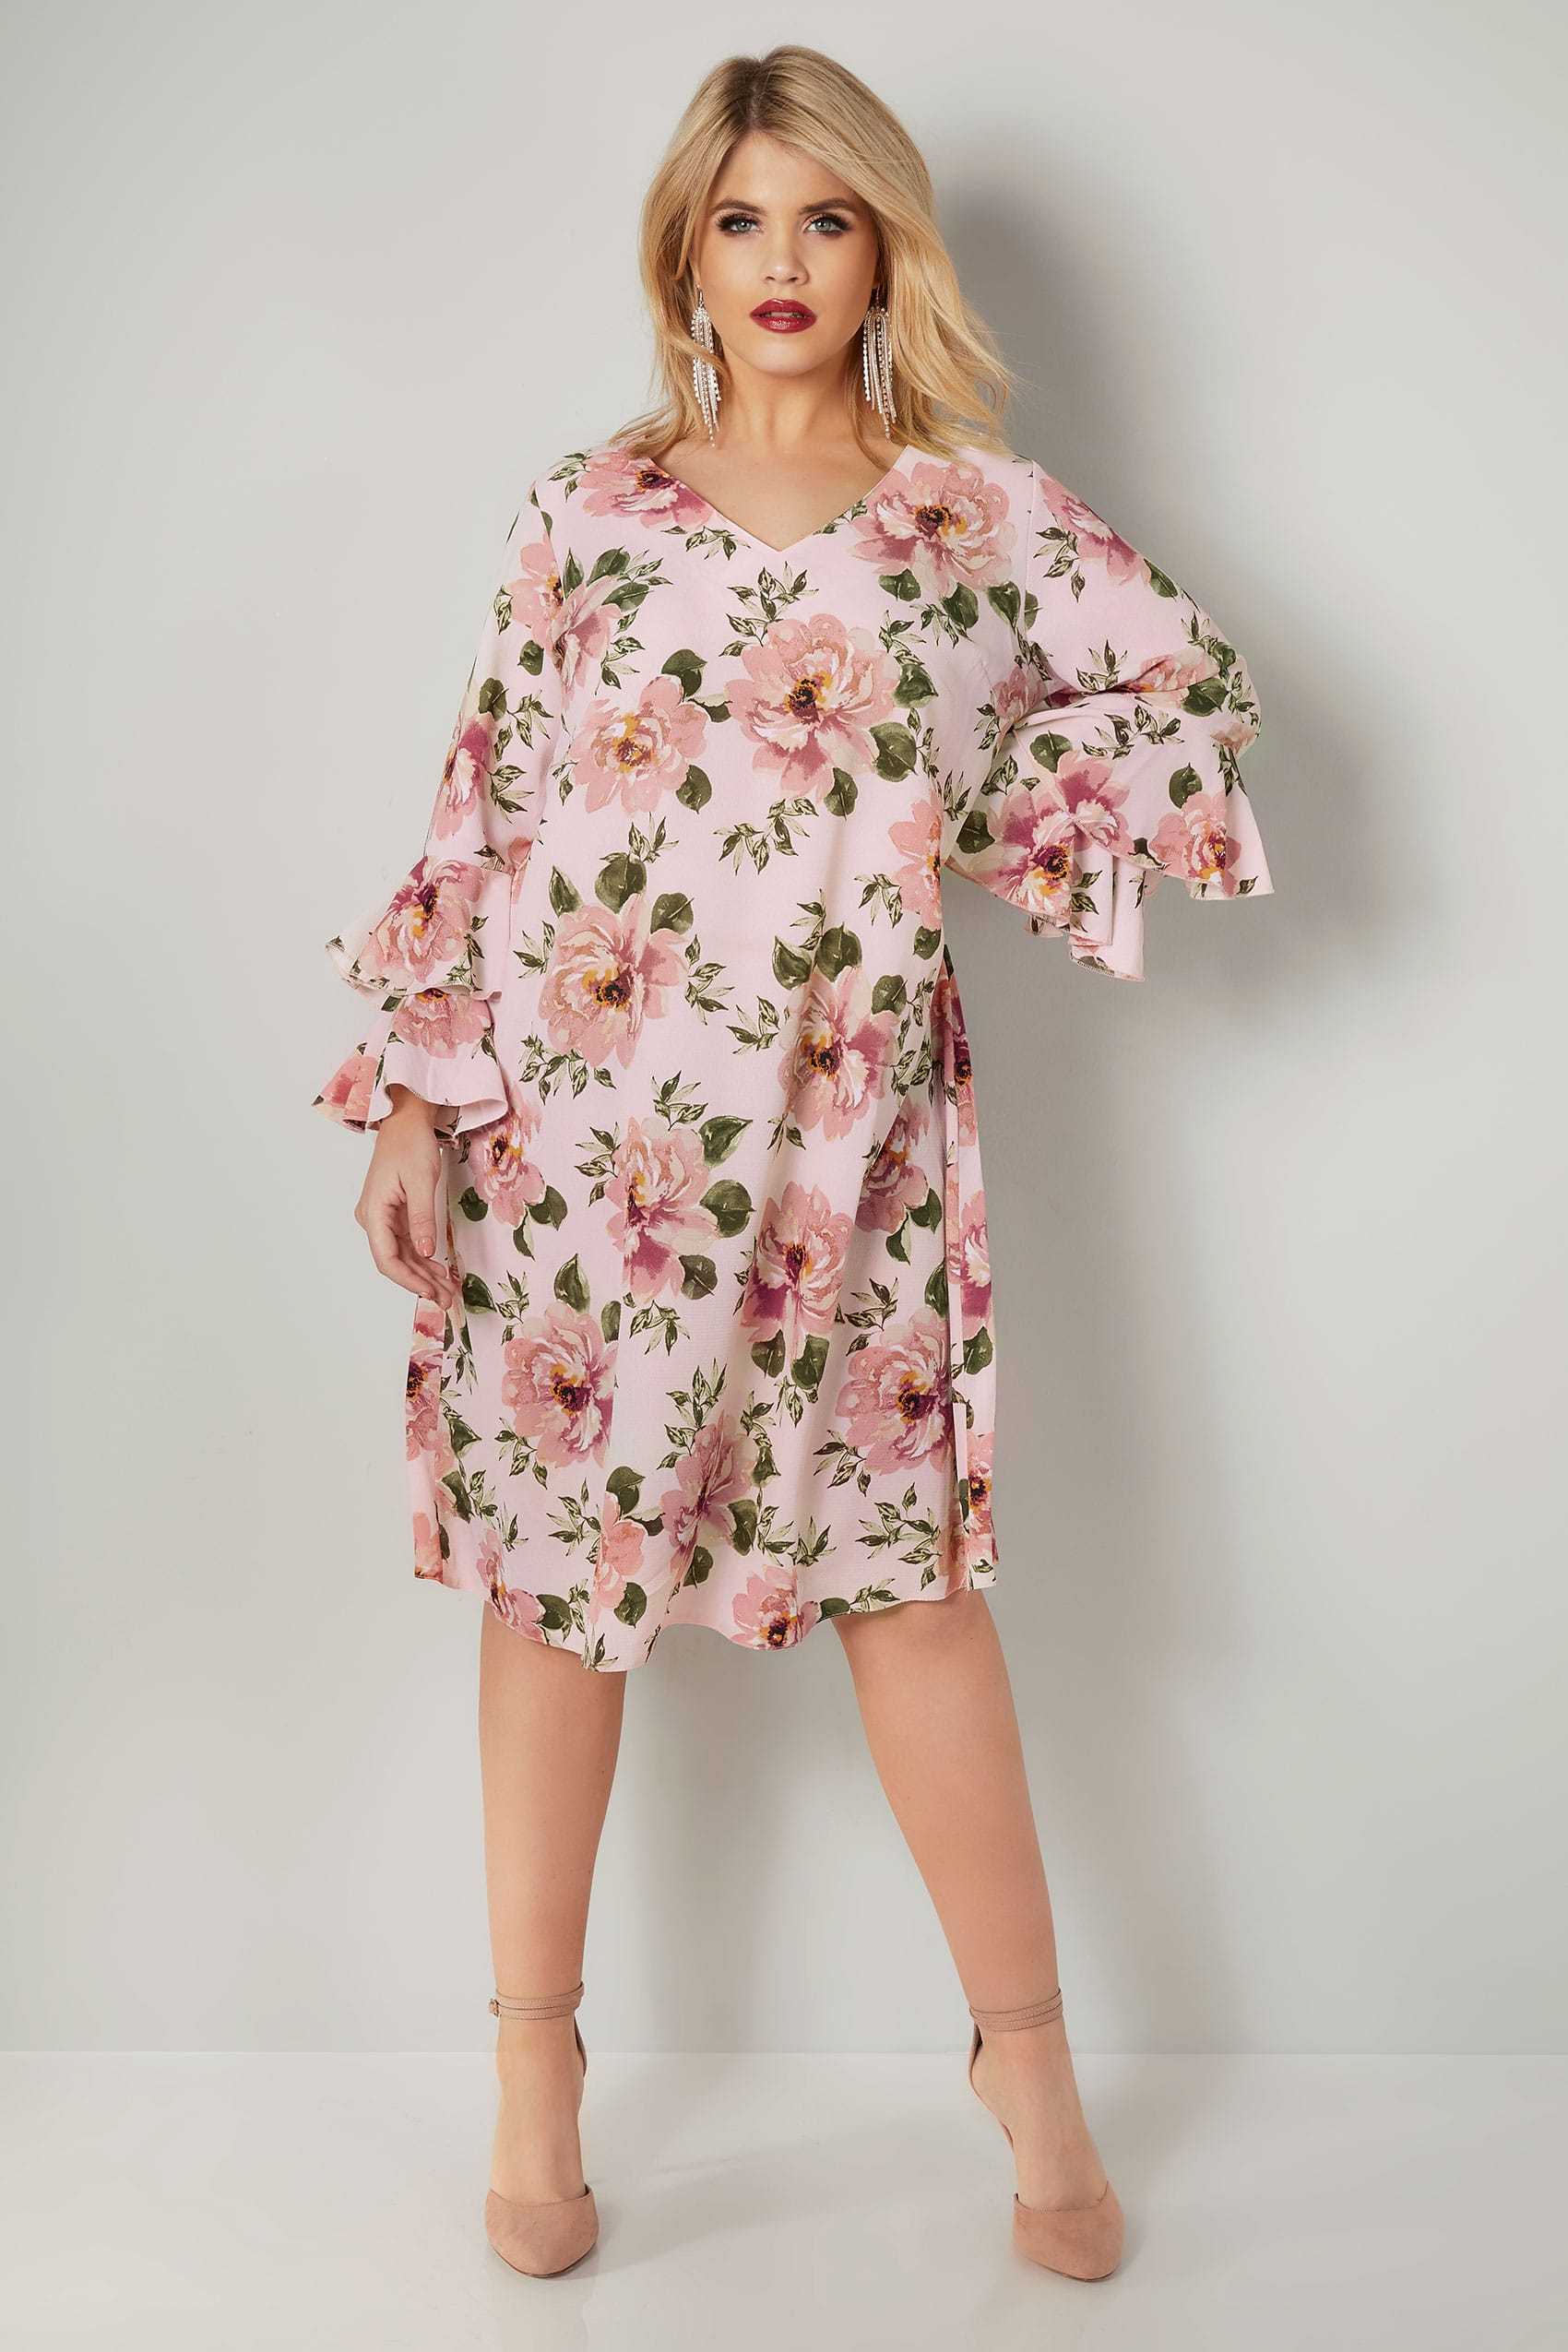 YOURS LONDON Pink Floral Print Dress With Layered Flute Sleeves, plus ...